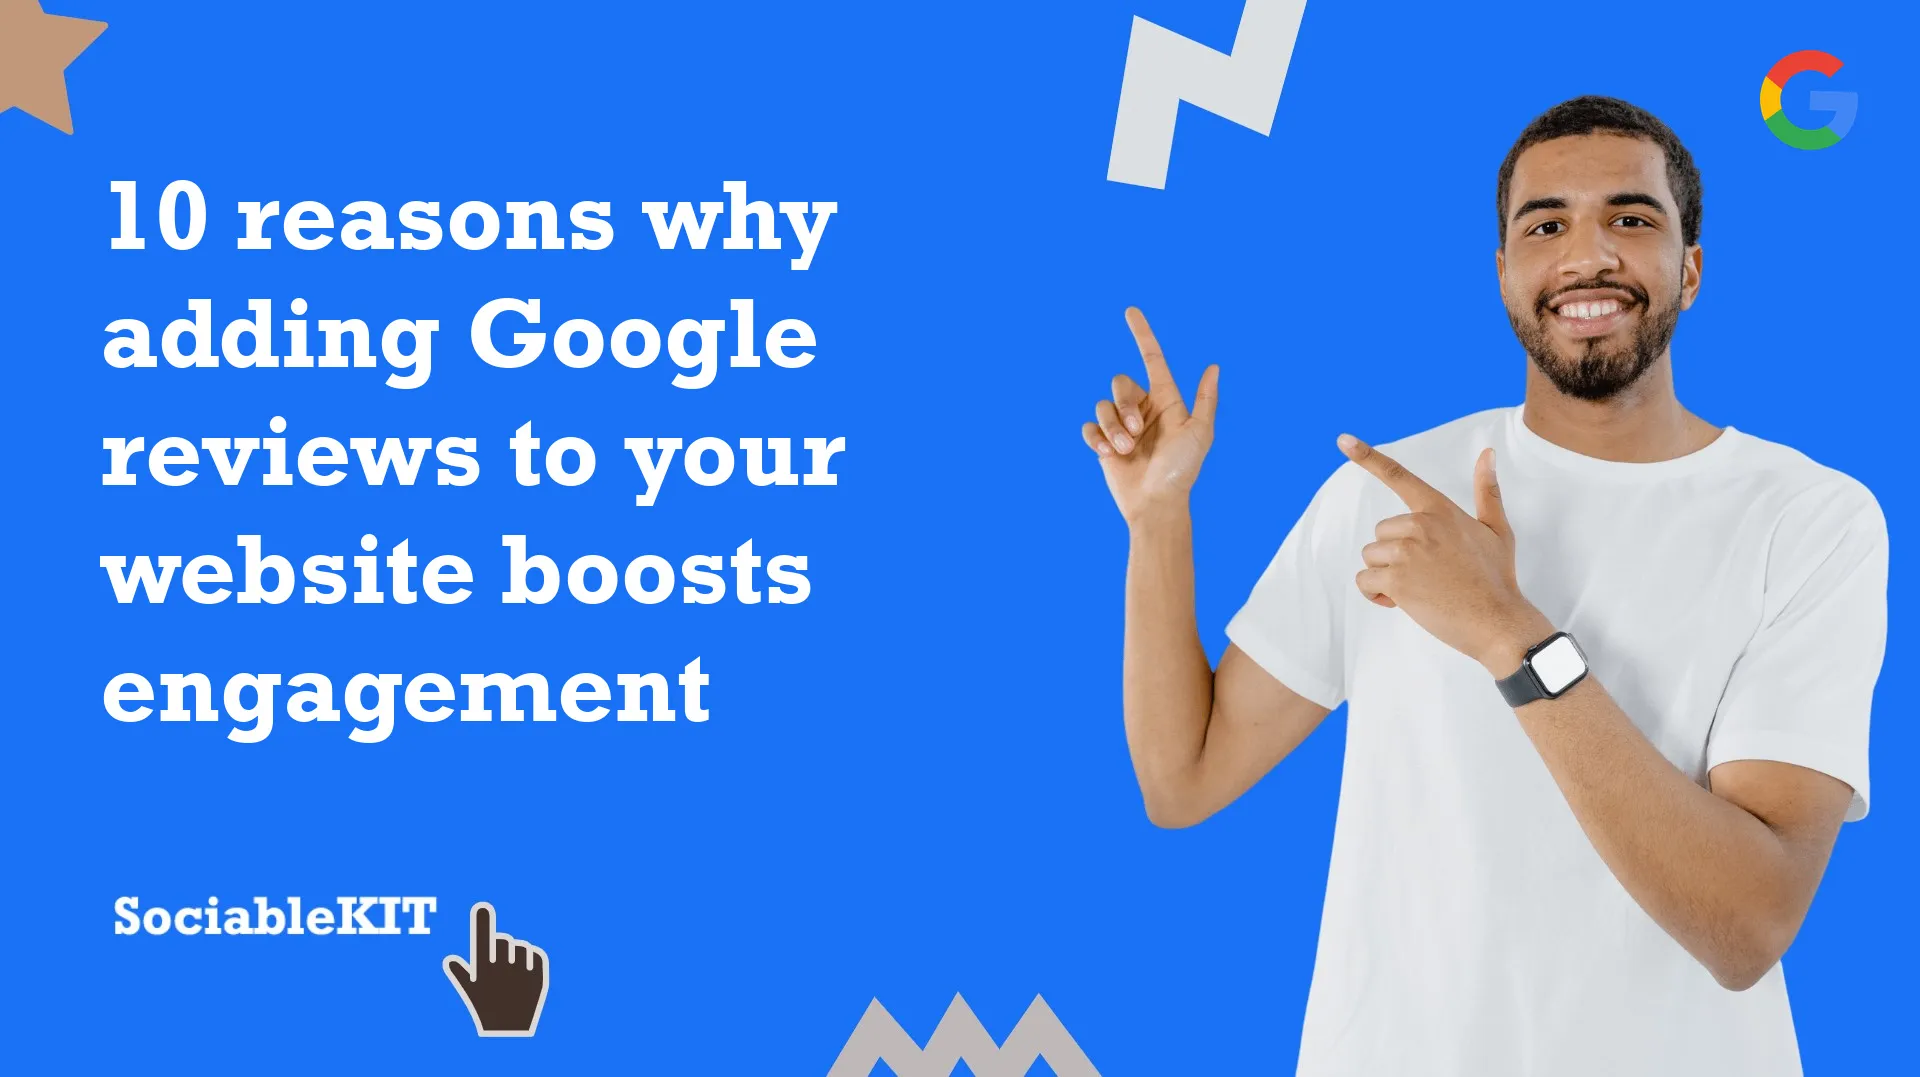 10 reasons why adding Google reviews to your website boosts engagement